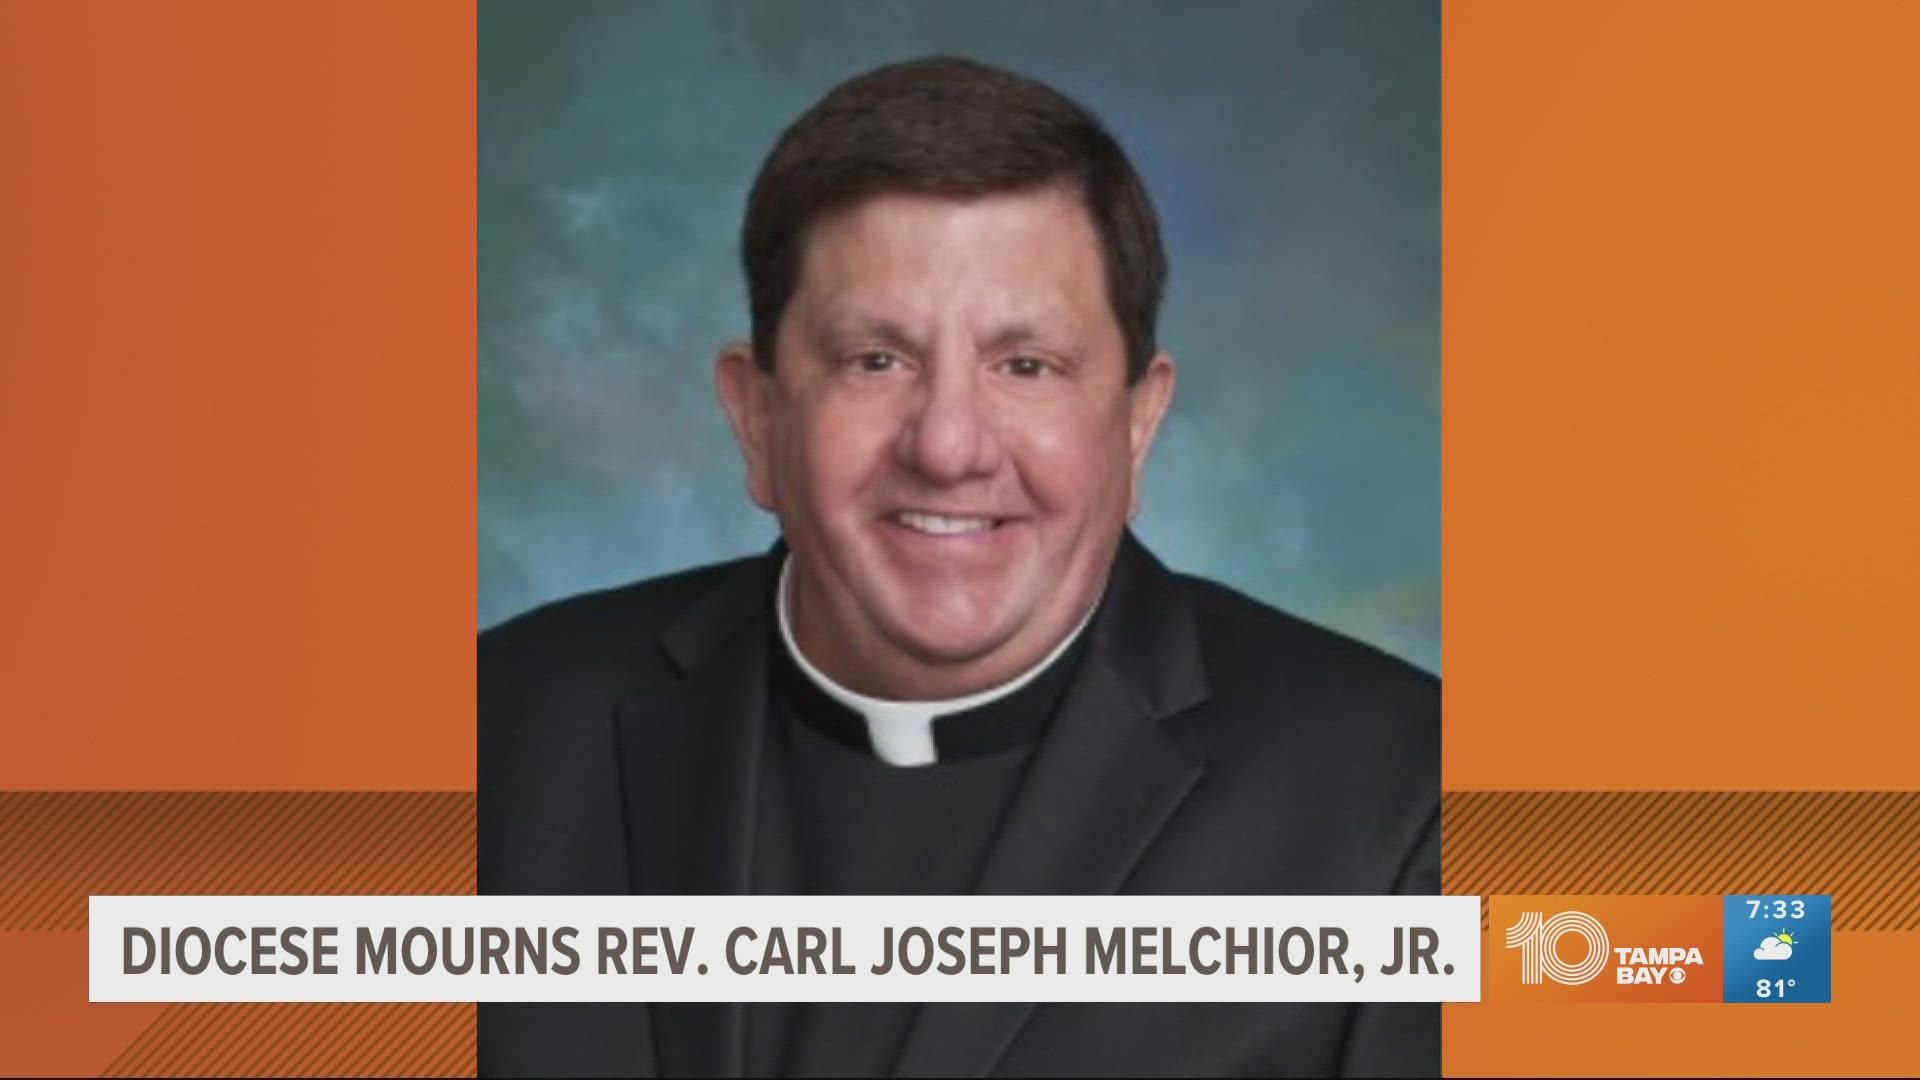 The diocese shared the news in a Facebook post saying, "We are saddened to share with you the shock and deep sorrow for the passing of Father Carl Melchior..."